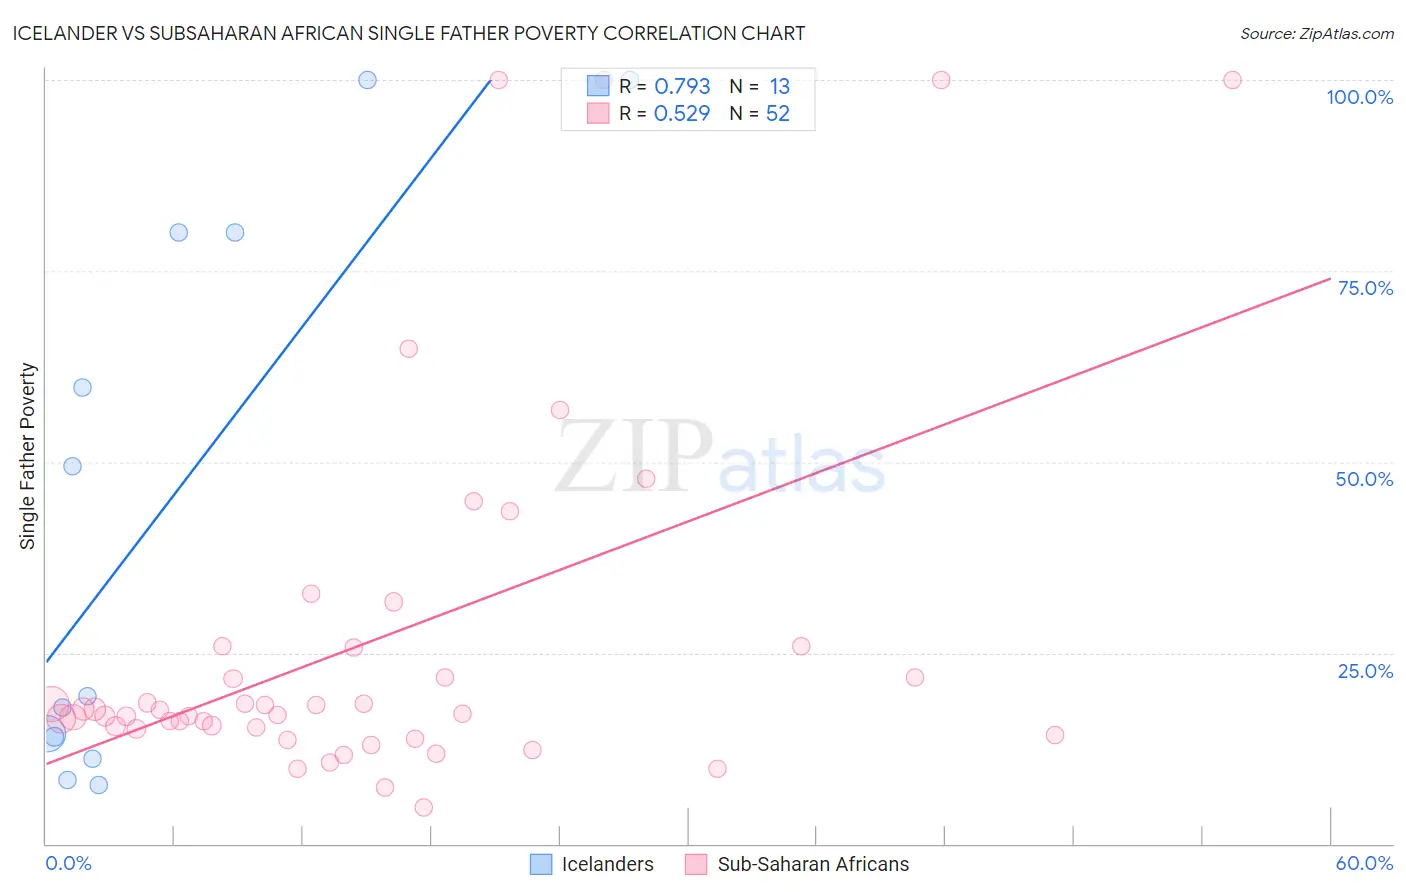 Icelander vs Subsaharan African Single Father Poverty